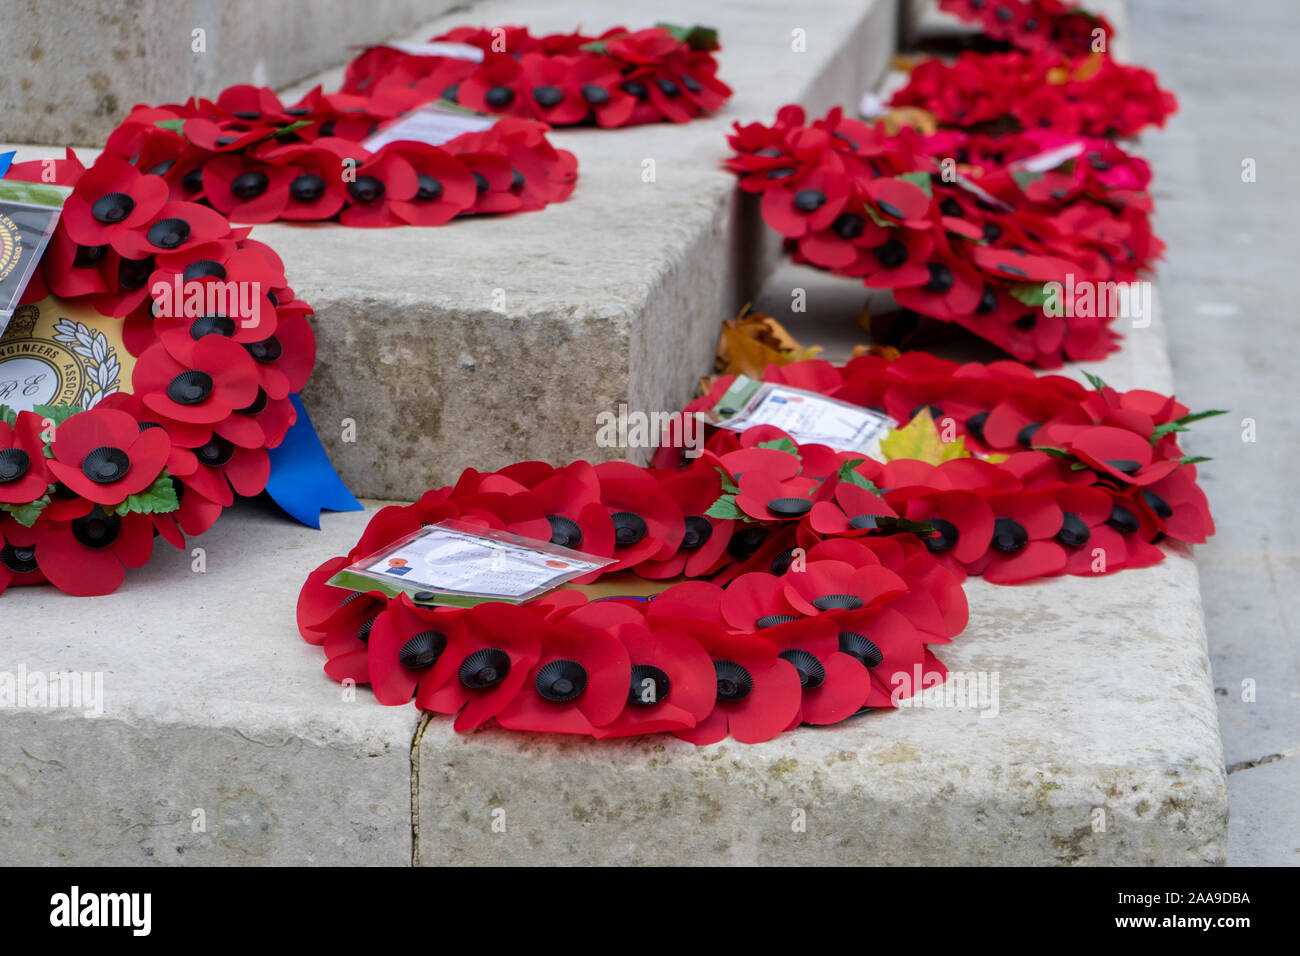 Red poppy wreathes laid around a War memorial on Remembrance Sunday Stock Photo